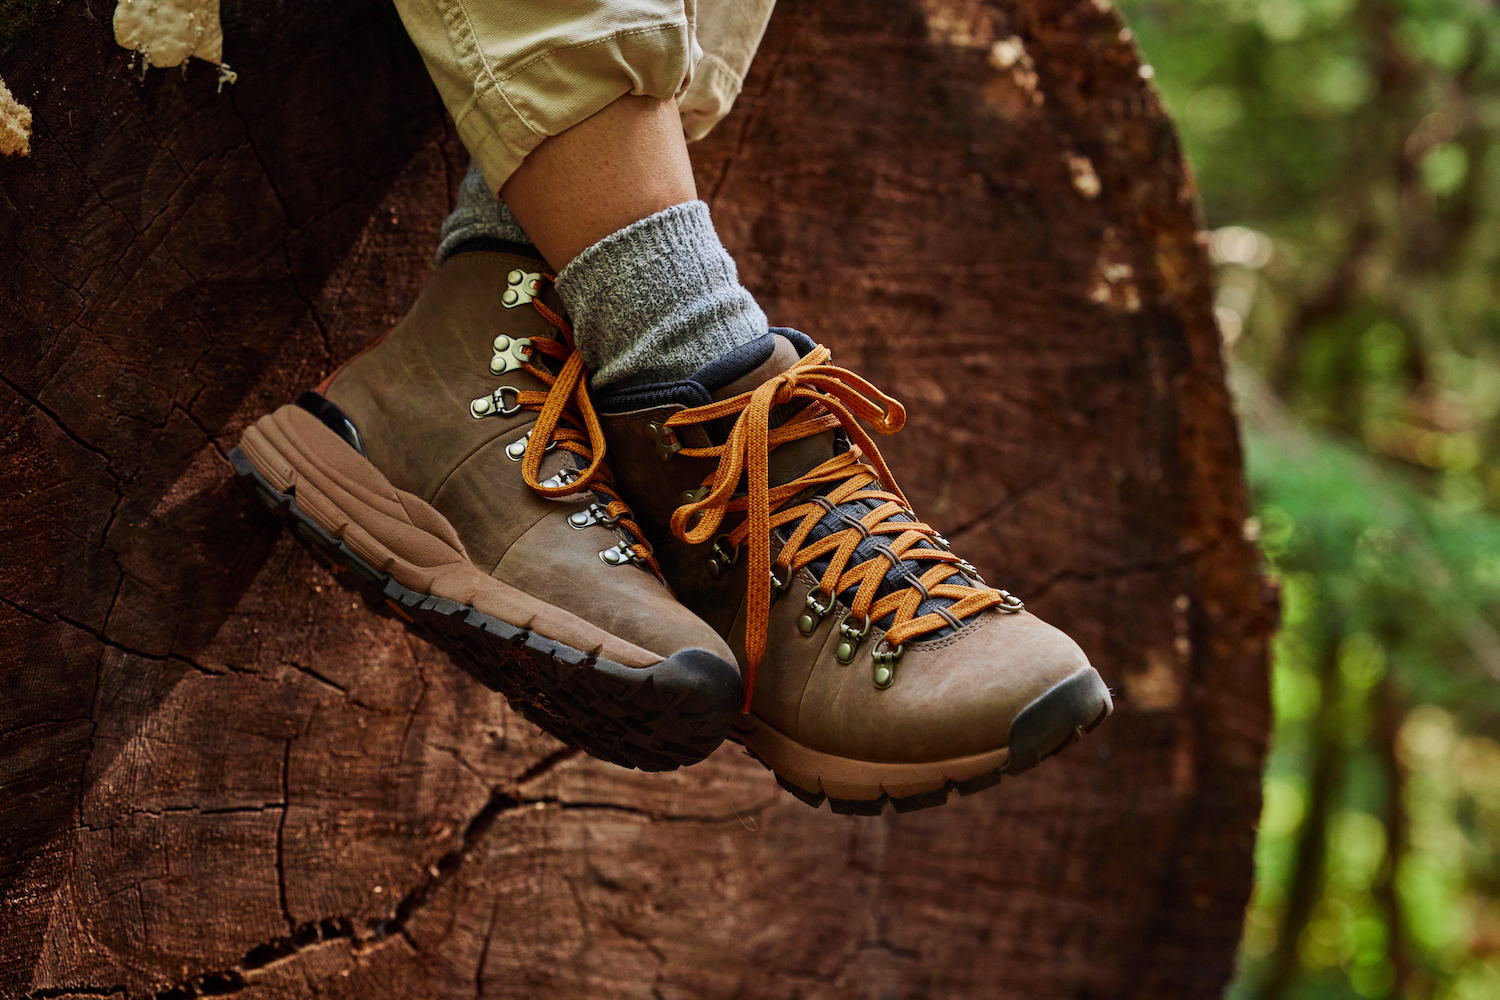 GIVEAWAY: She Explores x Danner Mountain 600